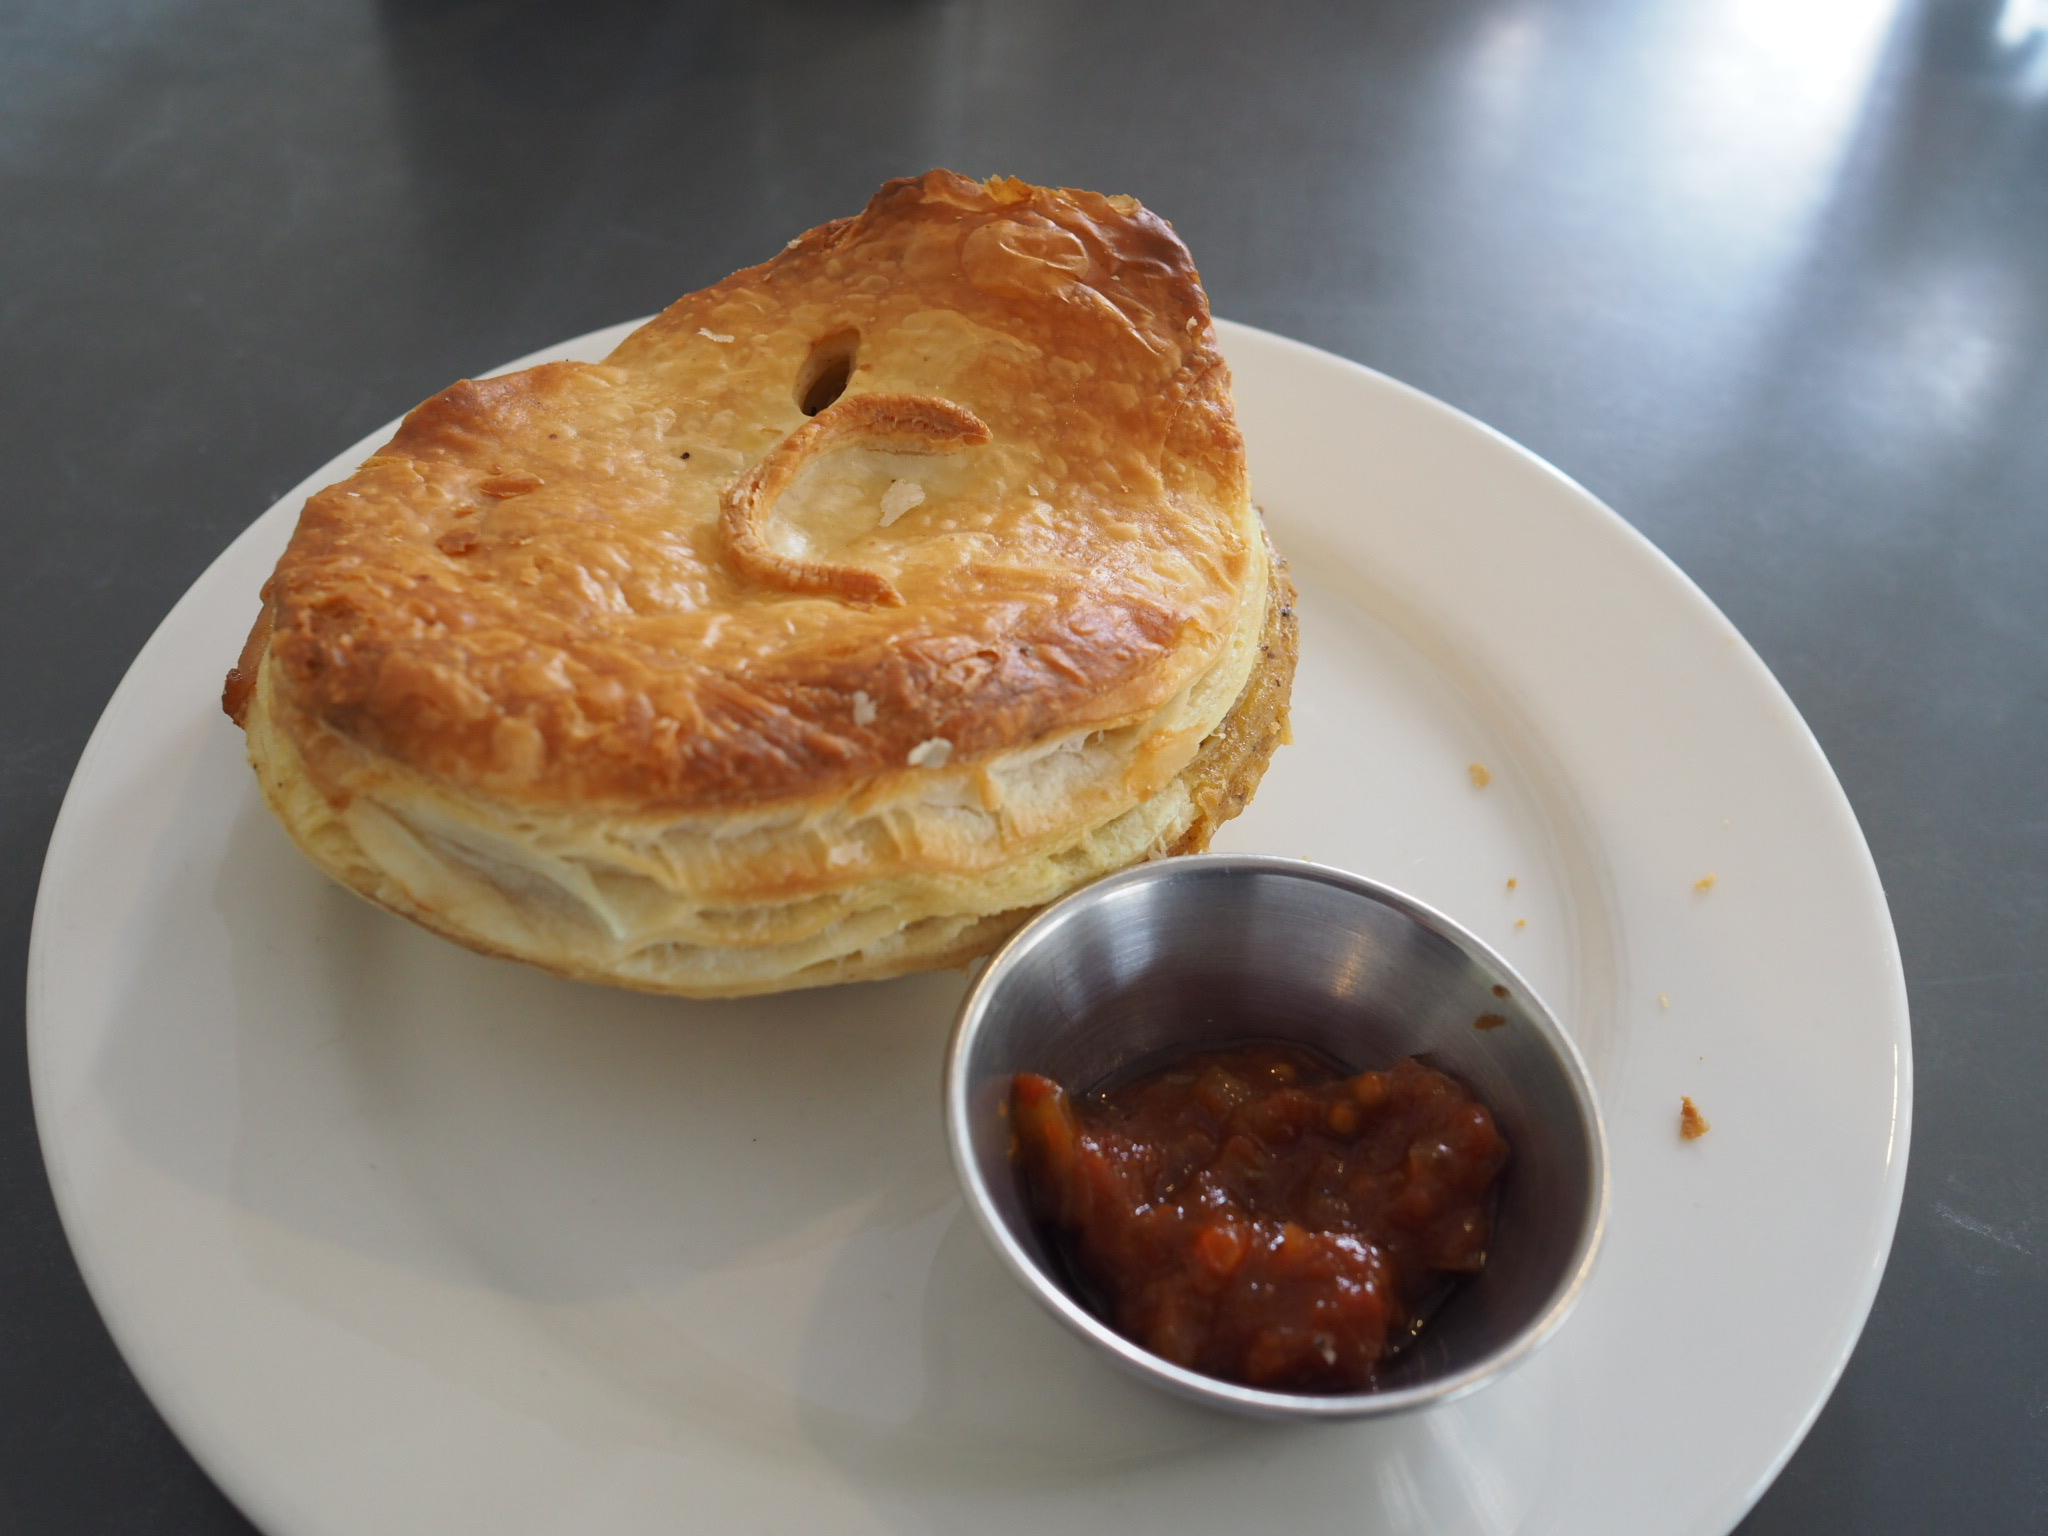 Arrowtown bakery and cafe - Chicken pie